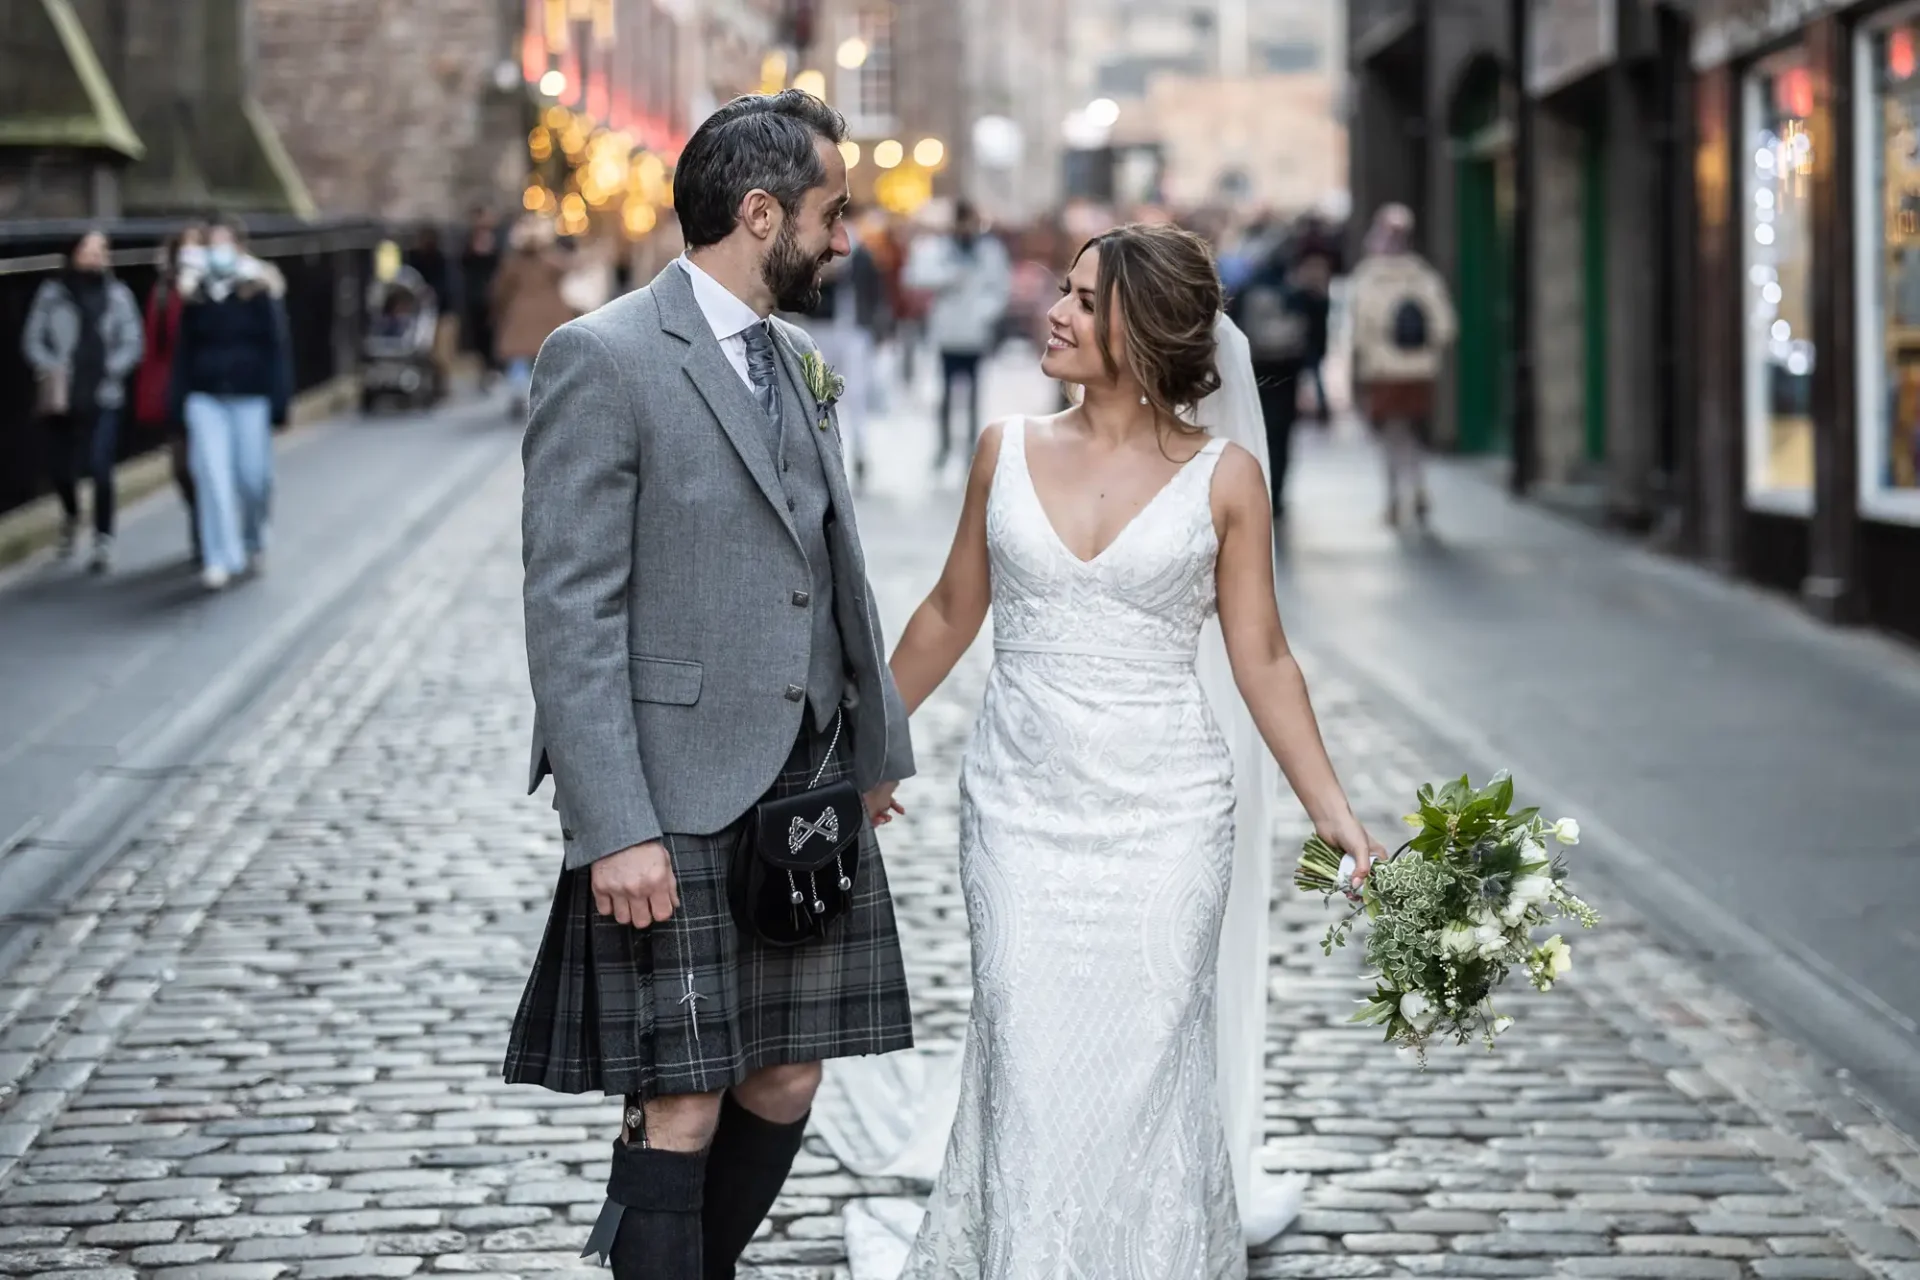 A bride in a white dress and a groom in a kilt sharing a joyful moment as they walk down a cobbled street.